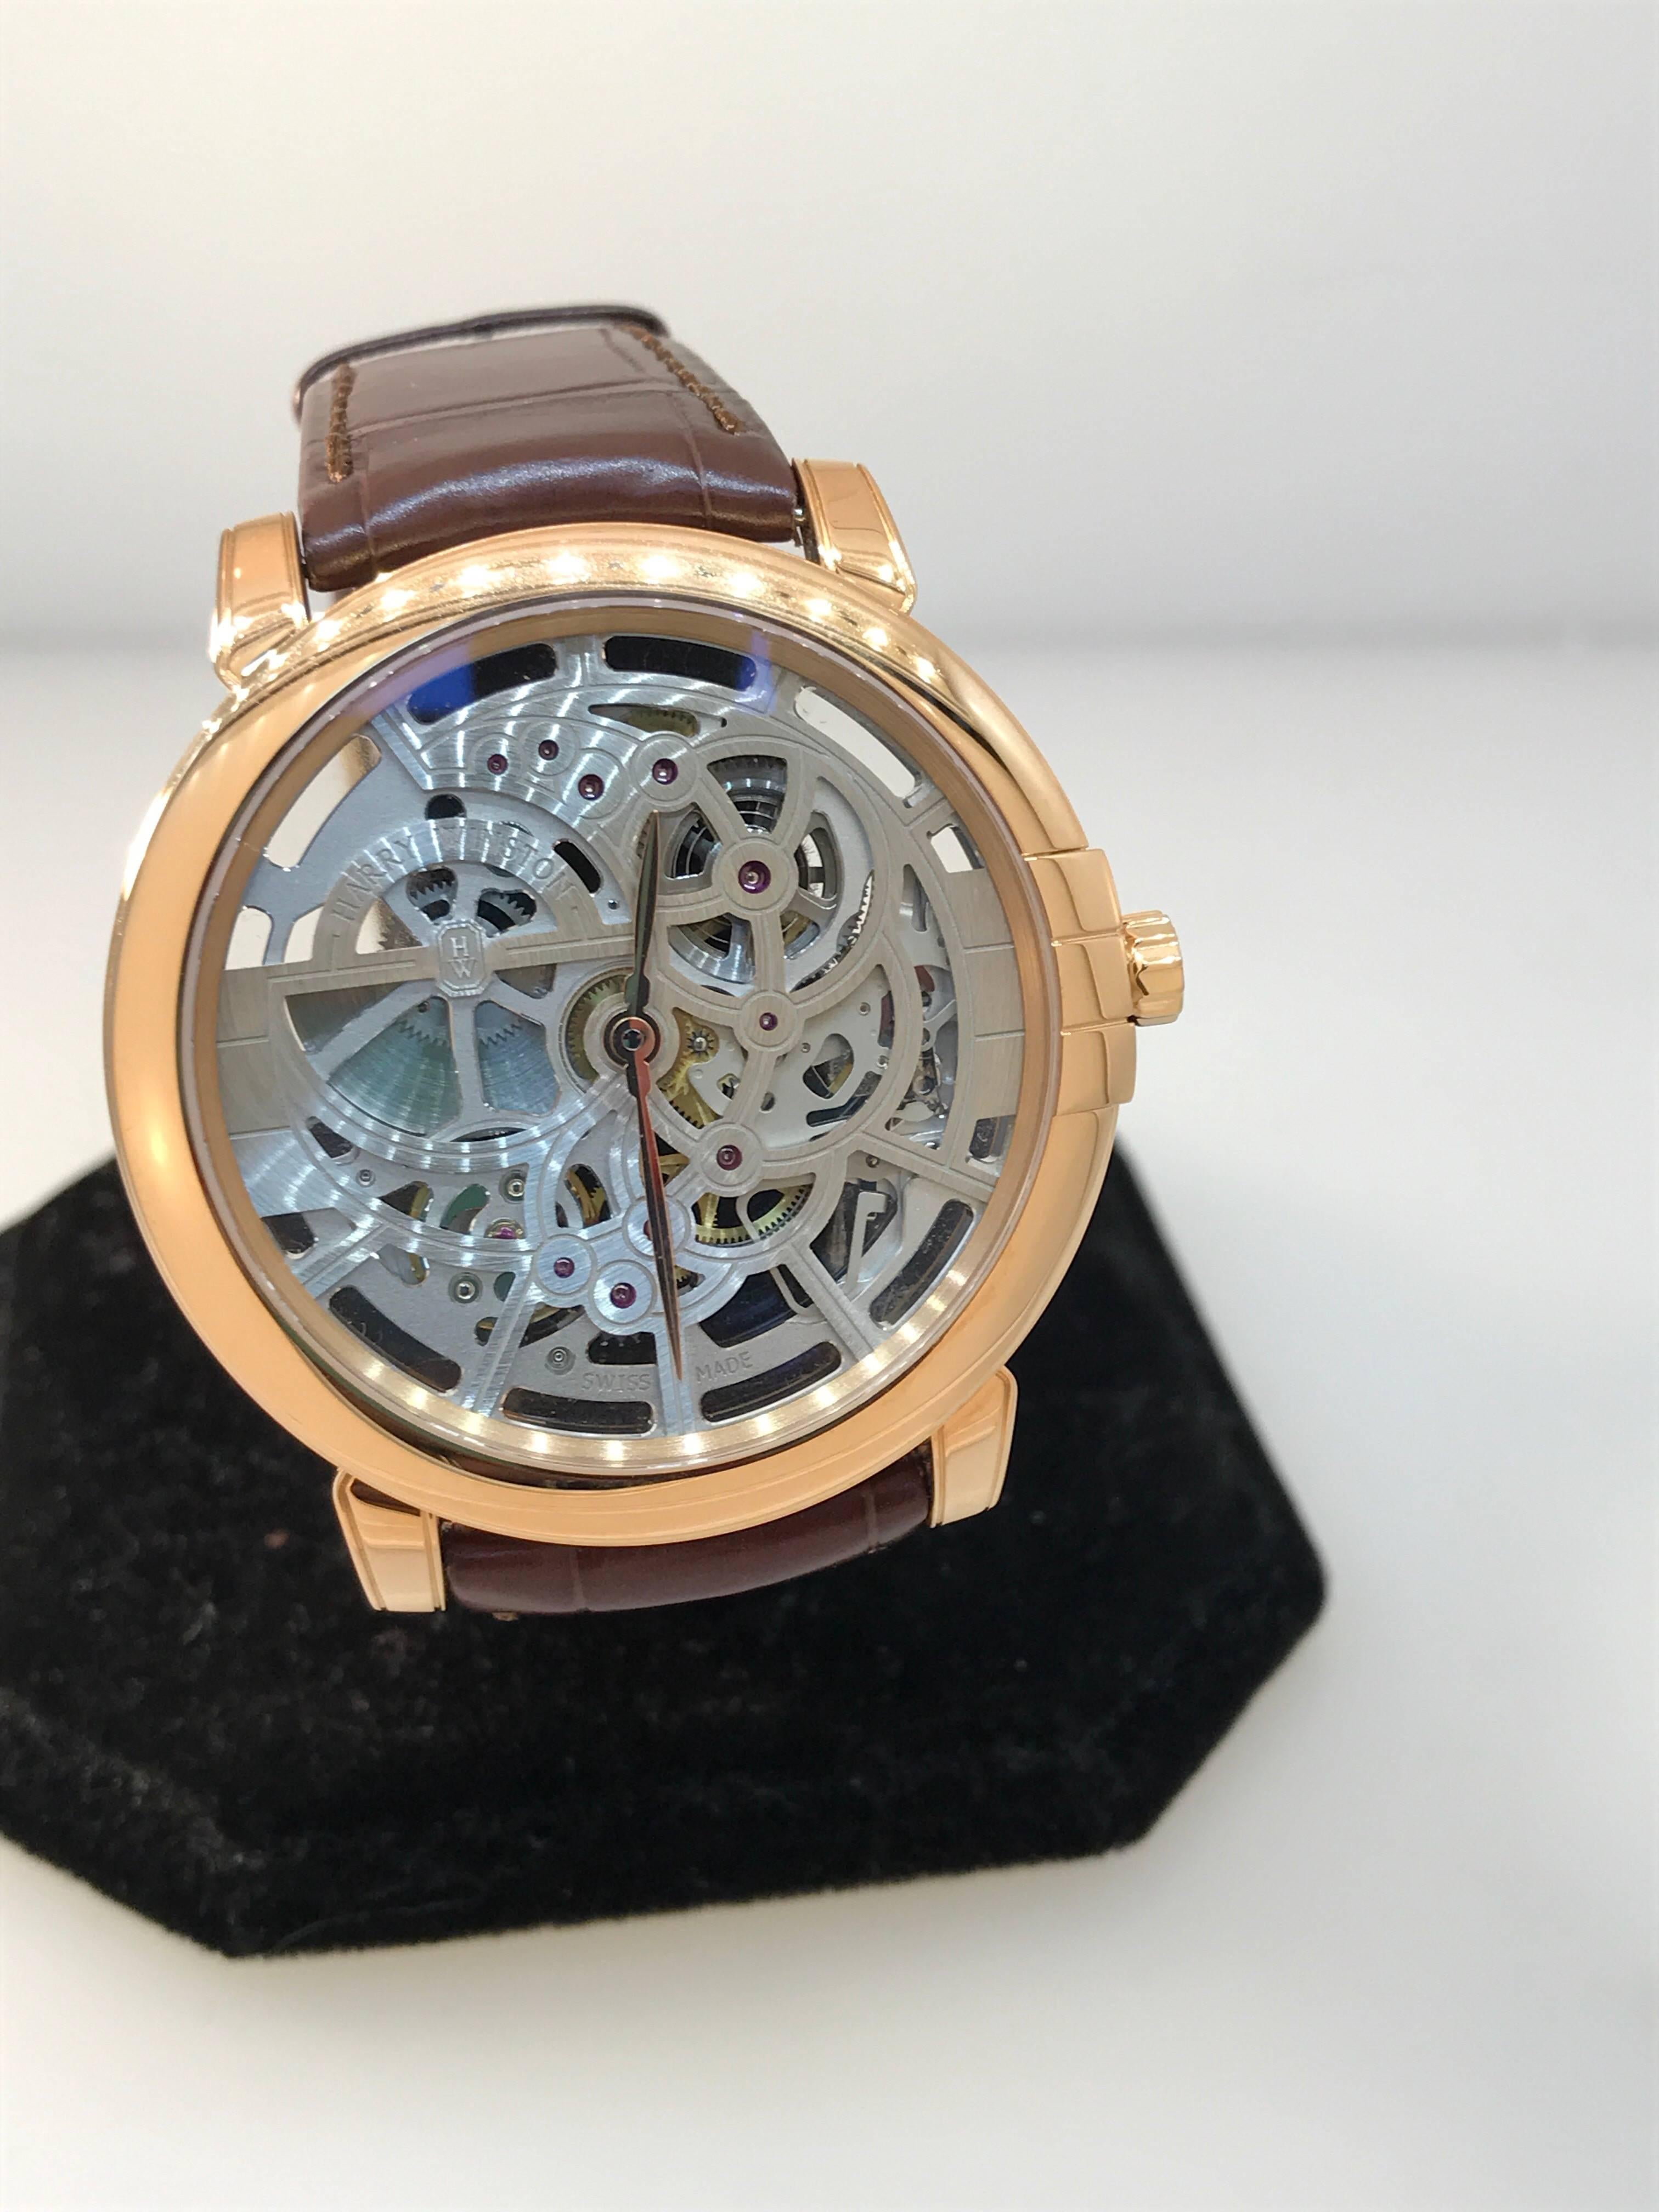 Harry Winston Midnight Men's Watch

Model Number: MIDAHM42RR001

100% Authentic

Brand New

Comes with original Harry Winston box

18 Karat Rose Gold

Scratch Resistant Sapphire Crystal

Skeleton Dial

Case Diameter: 42mm

Swiss Made Automatic